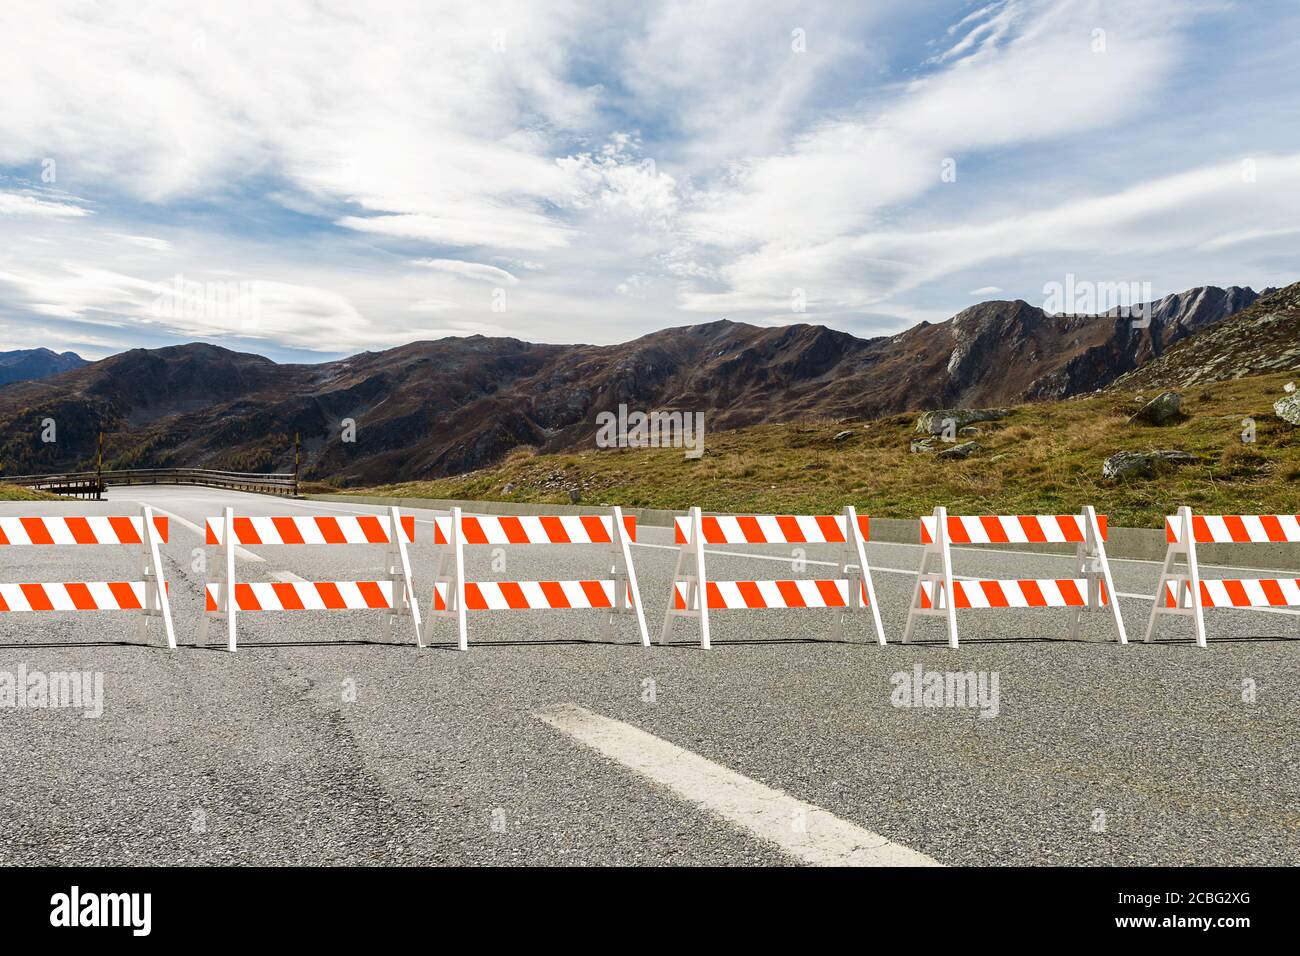 Red and white plastic a-frame barricades set across the road block the passage - in the background a view of the mountains - 3d illustration Stock Photo